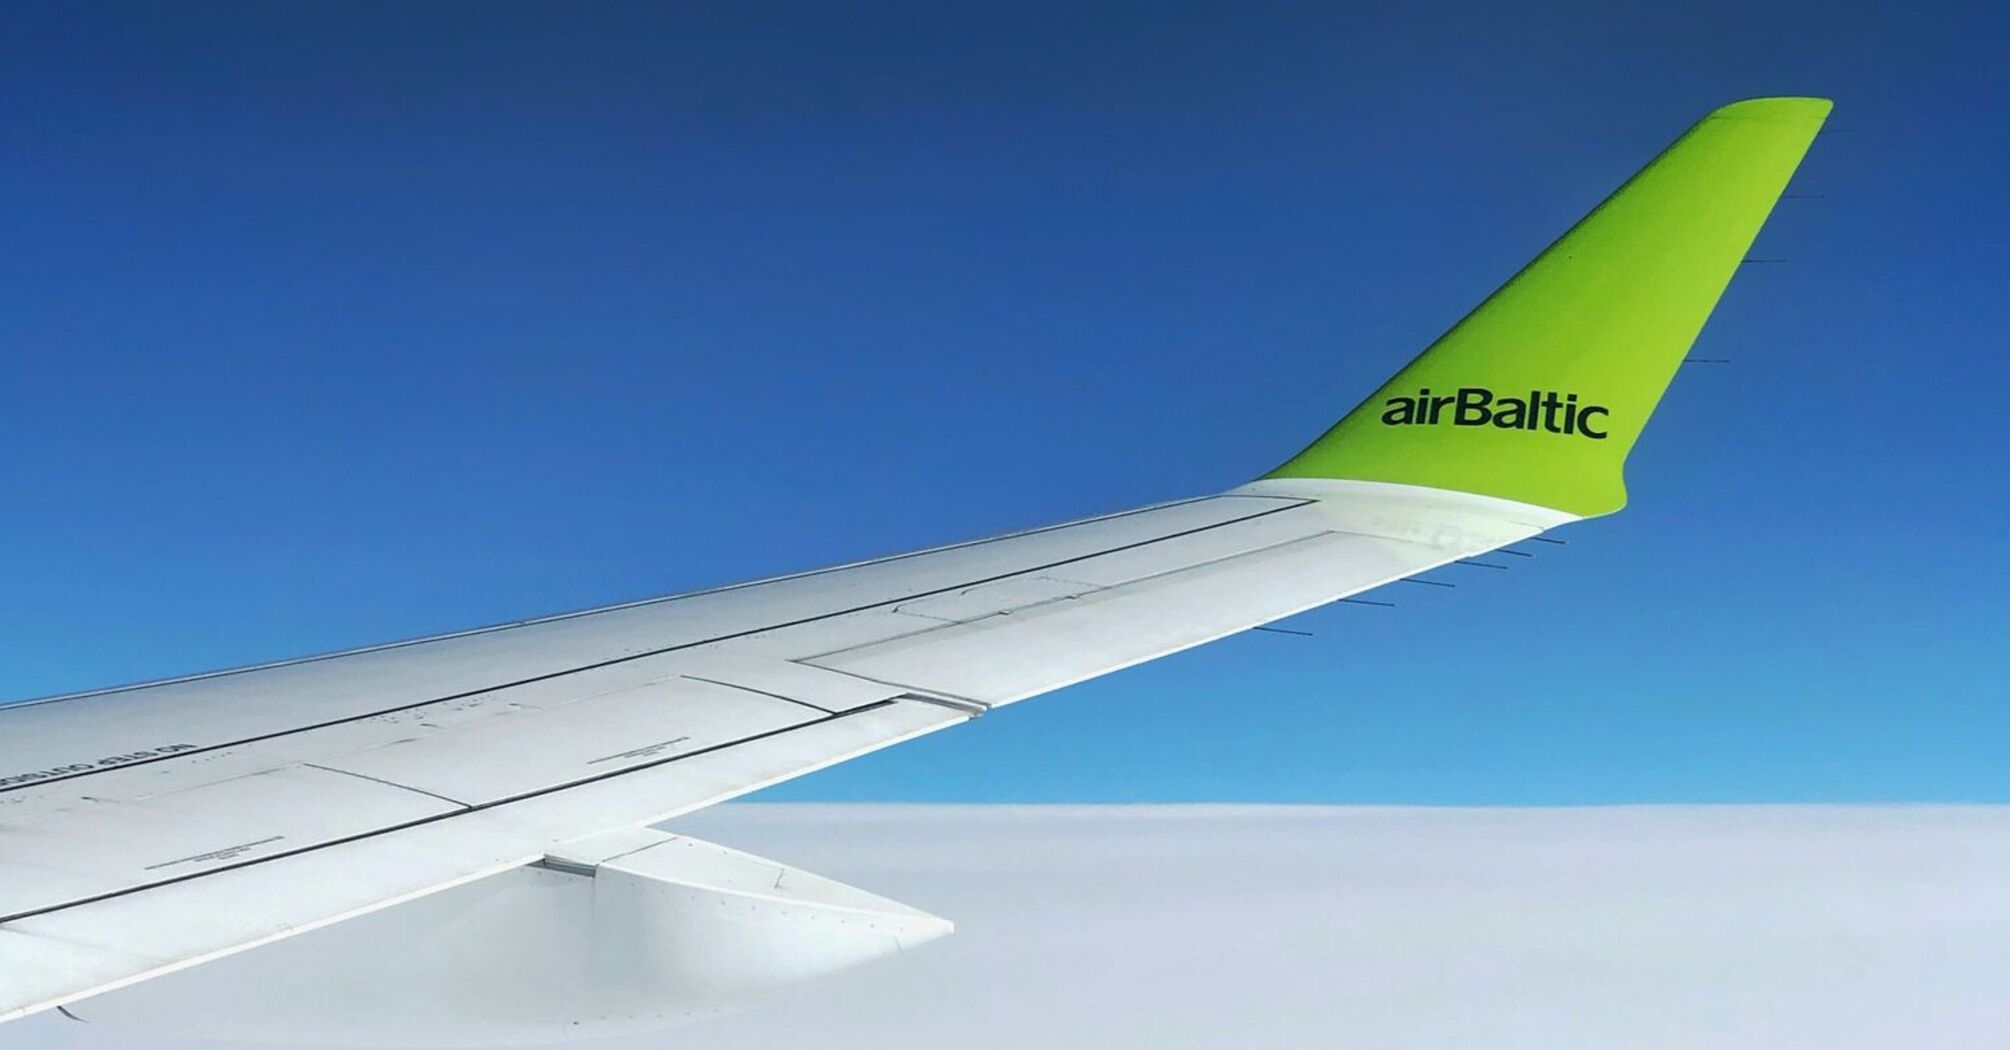 View from an airBaltic airplane window showing the wing and bright sky